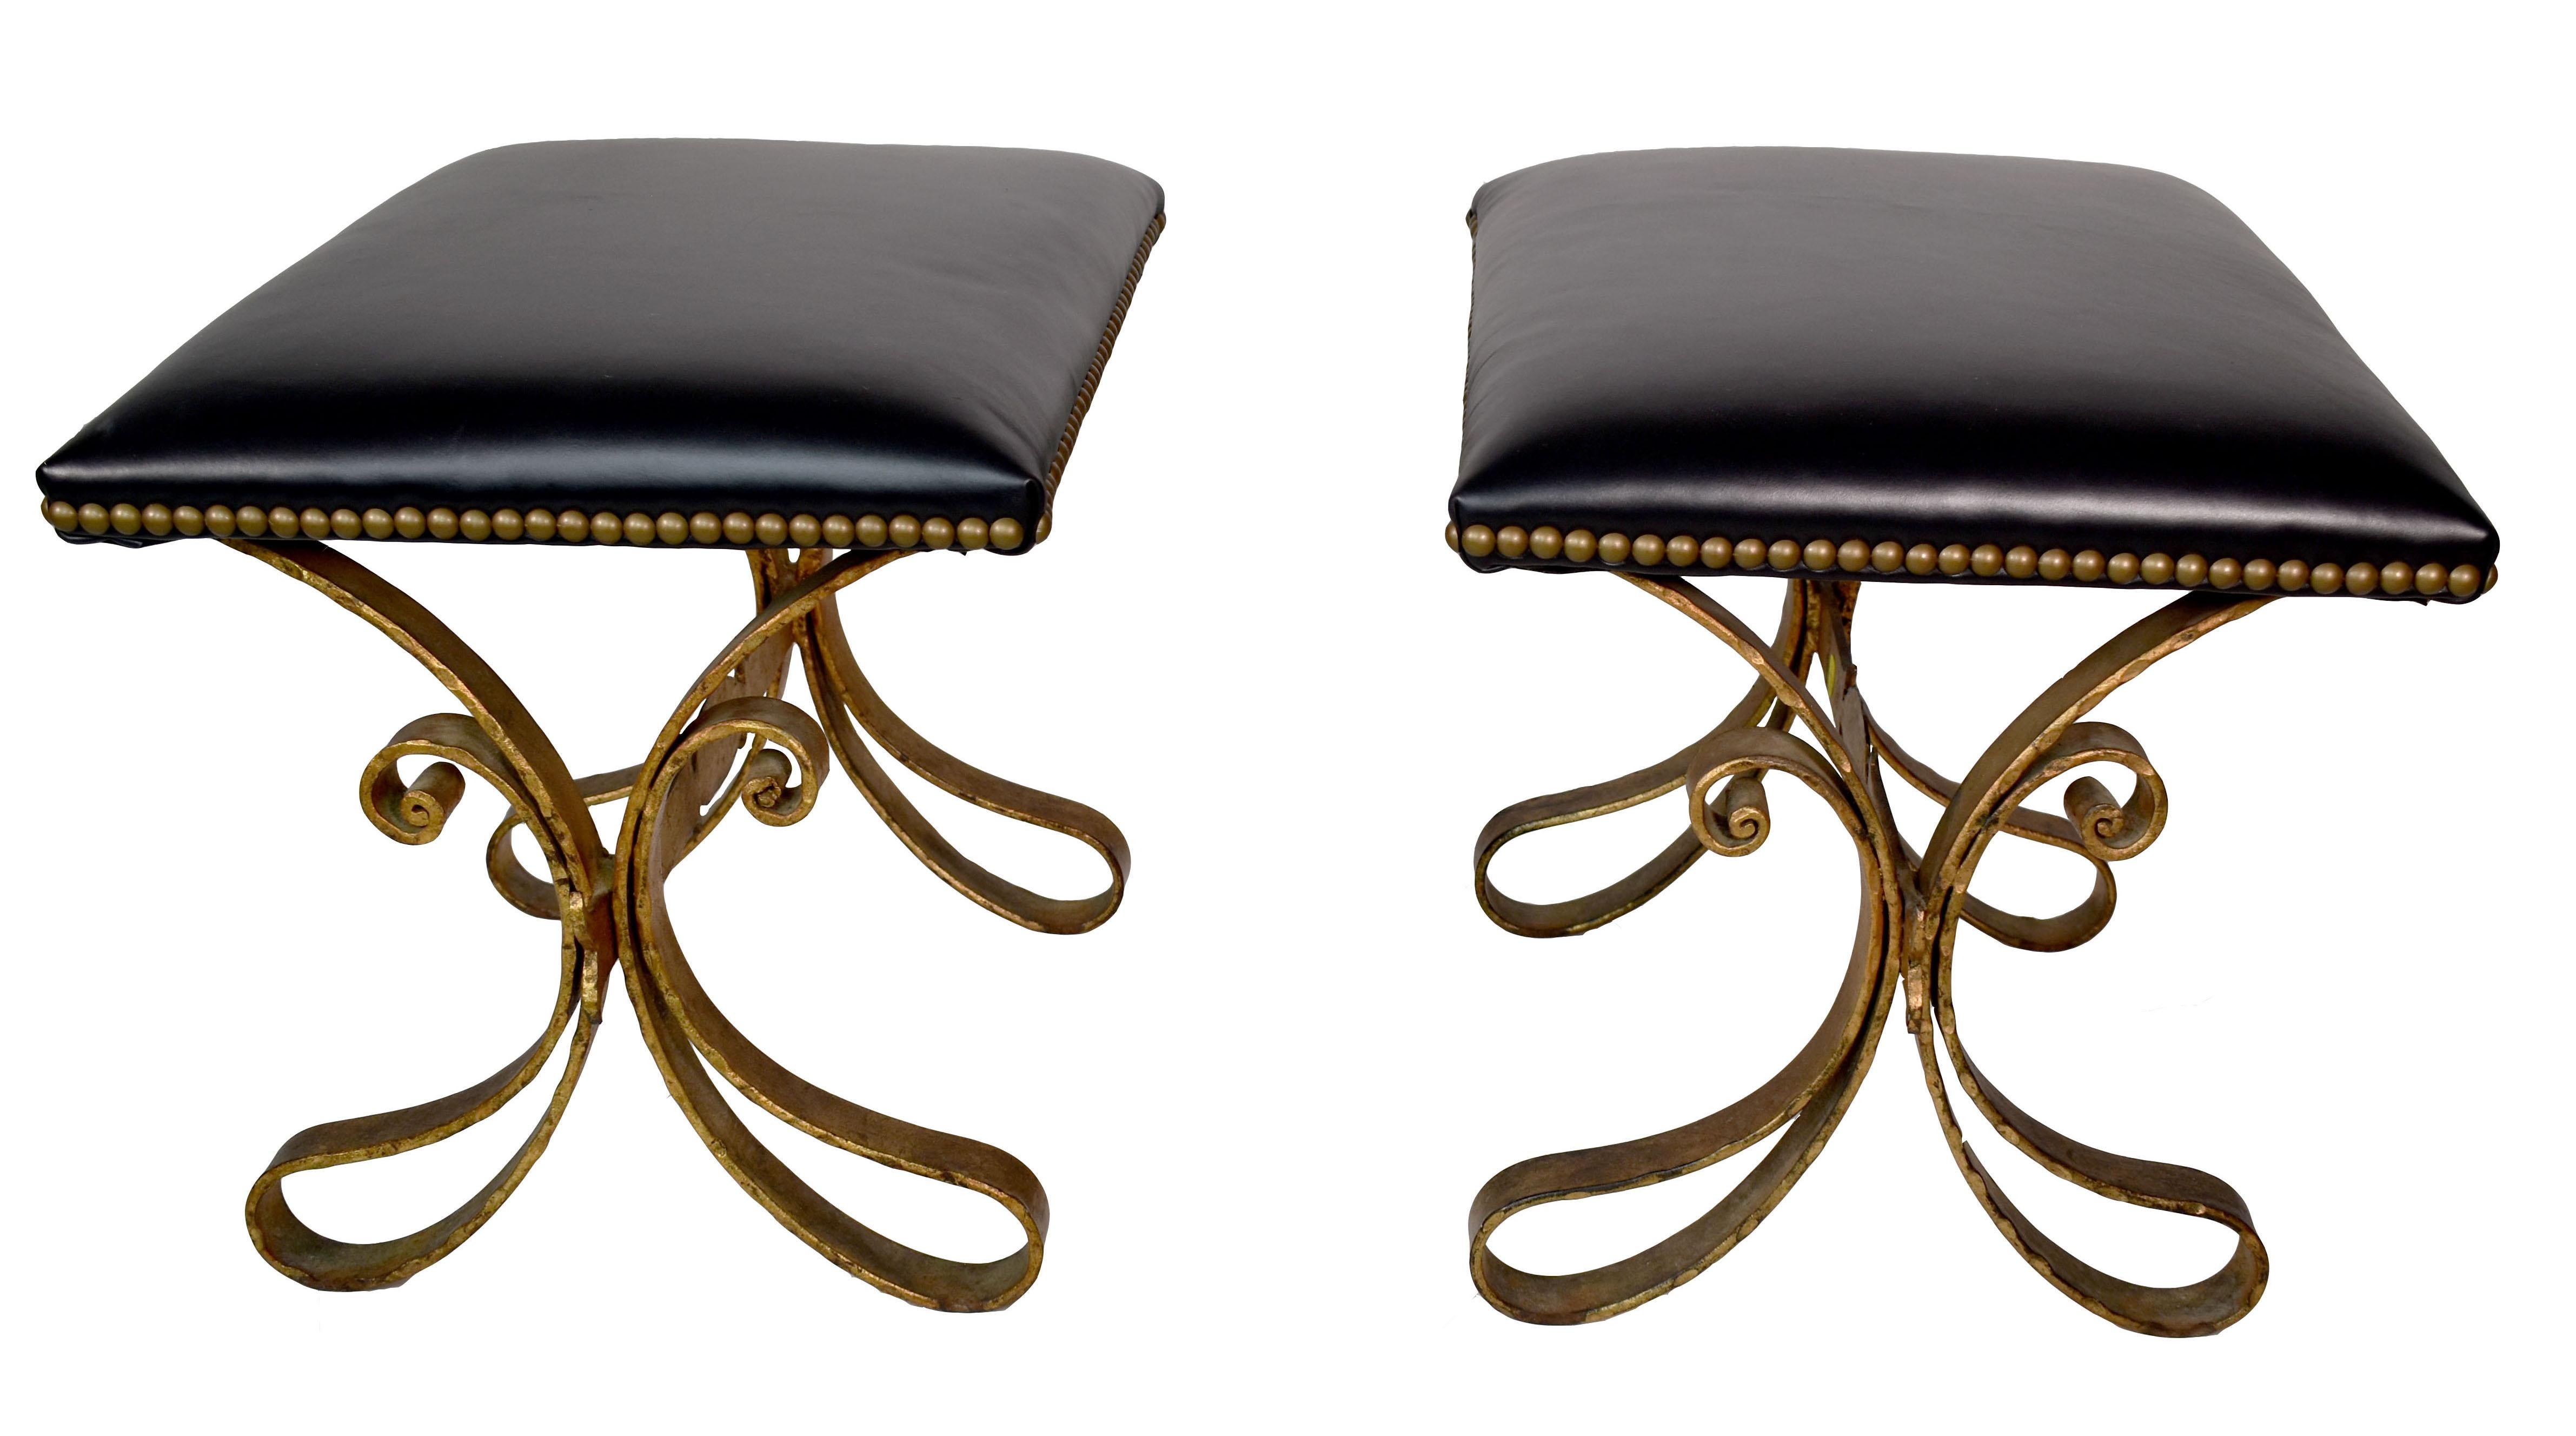 Pair of vintage French gilded, hand-forged iron and upholstered benches or stools. In the style of Gilbert Poillerat. Newly reupholstered in black leather.